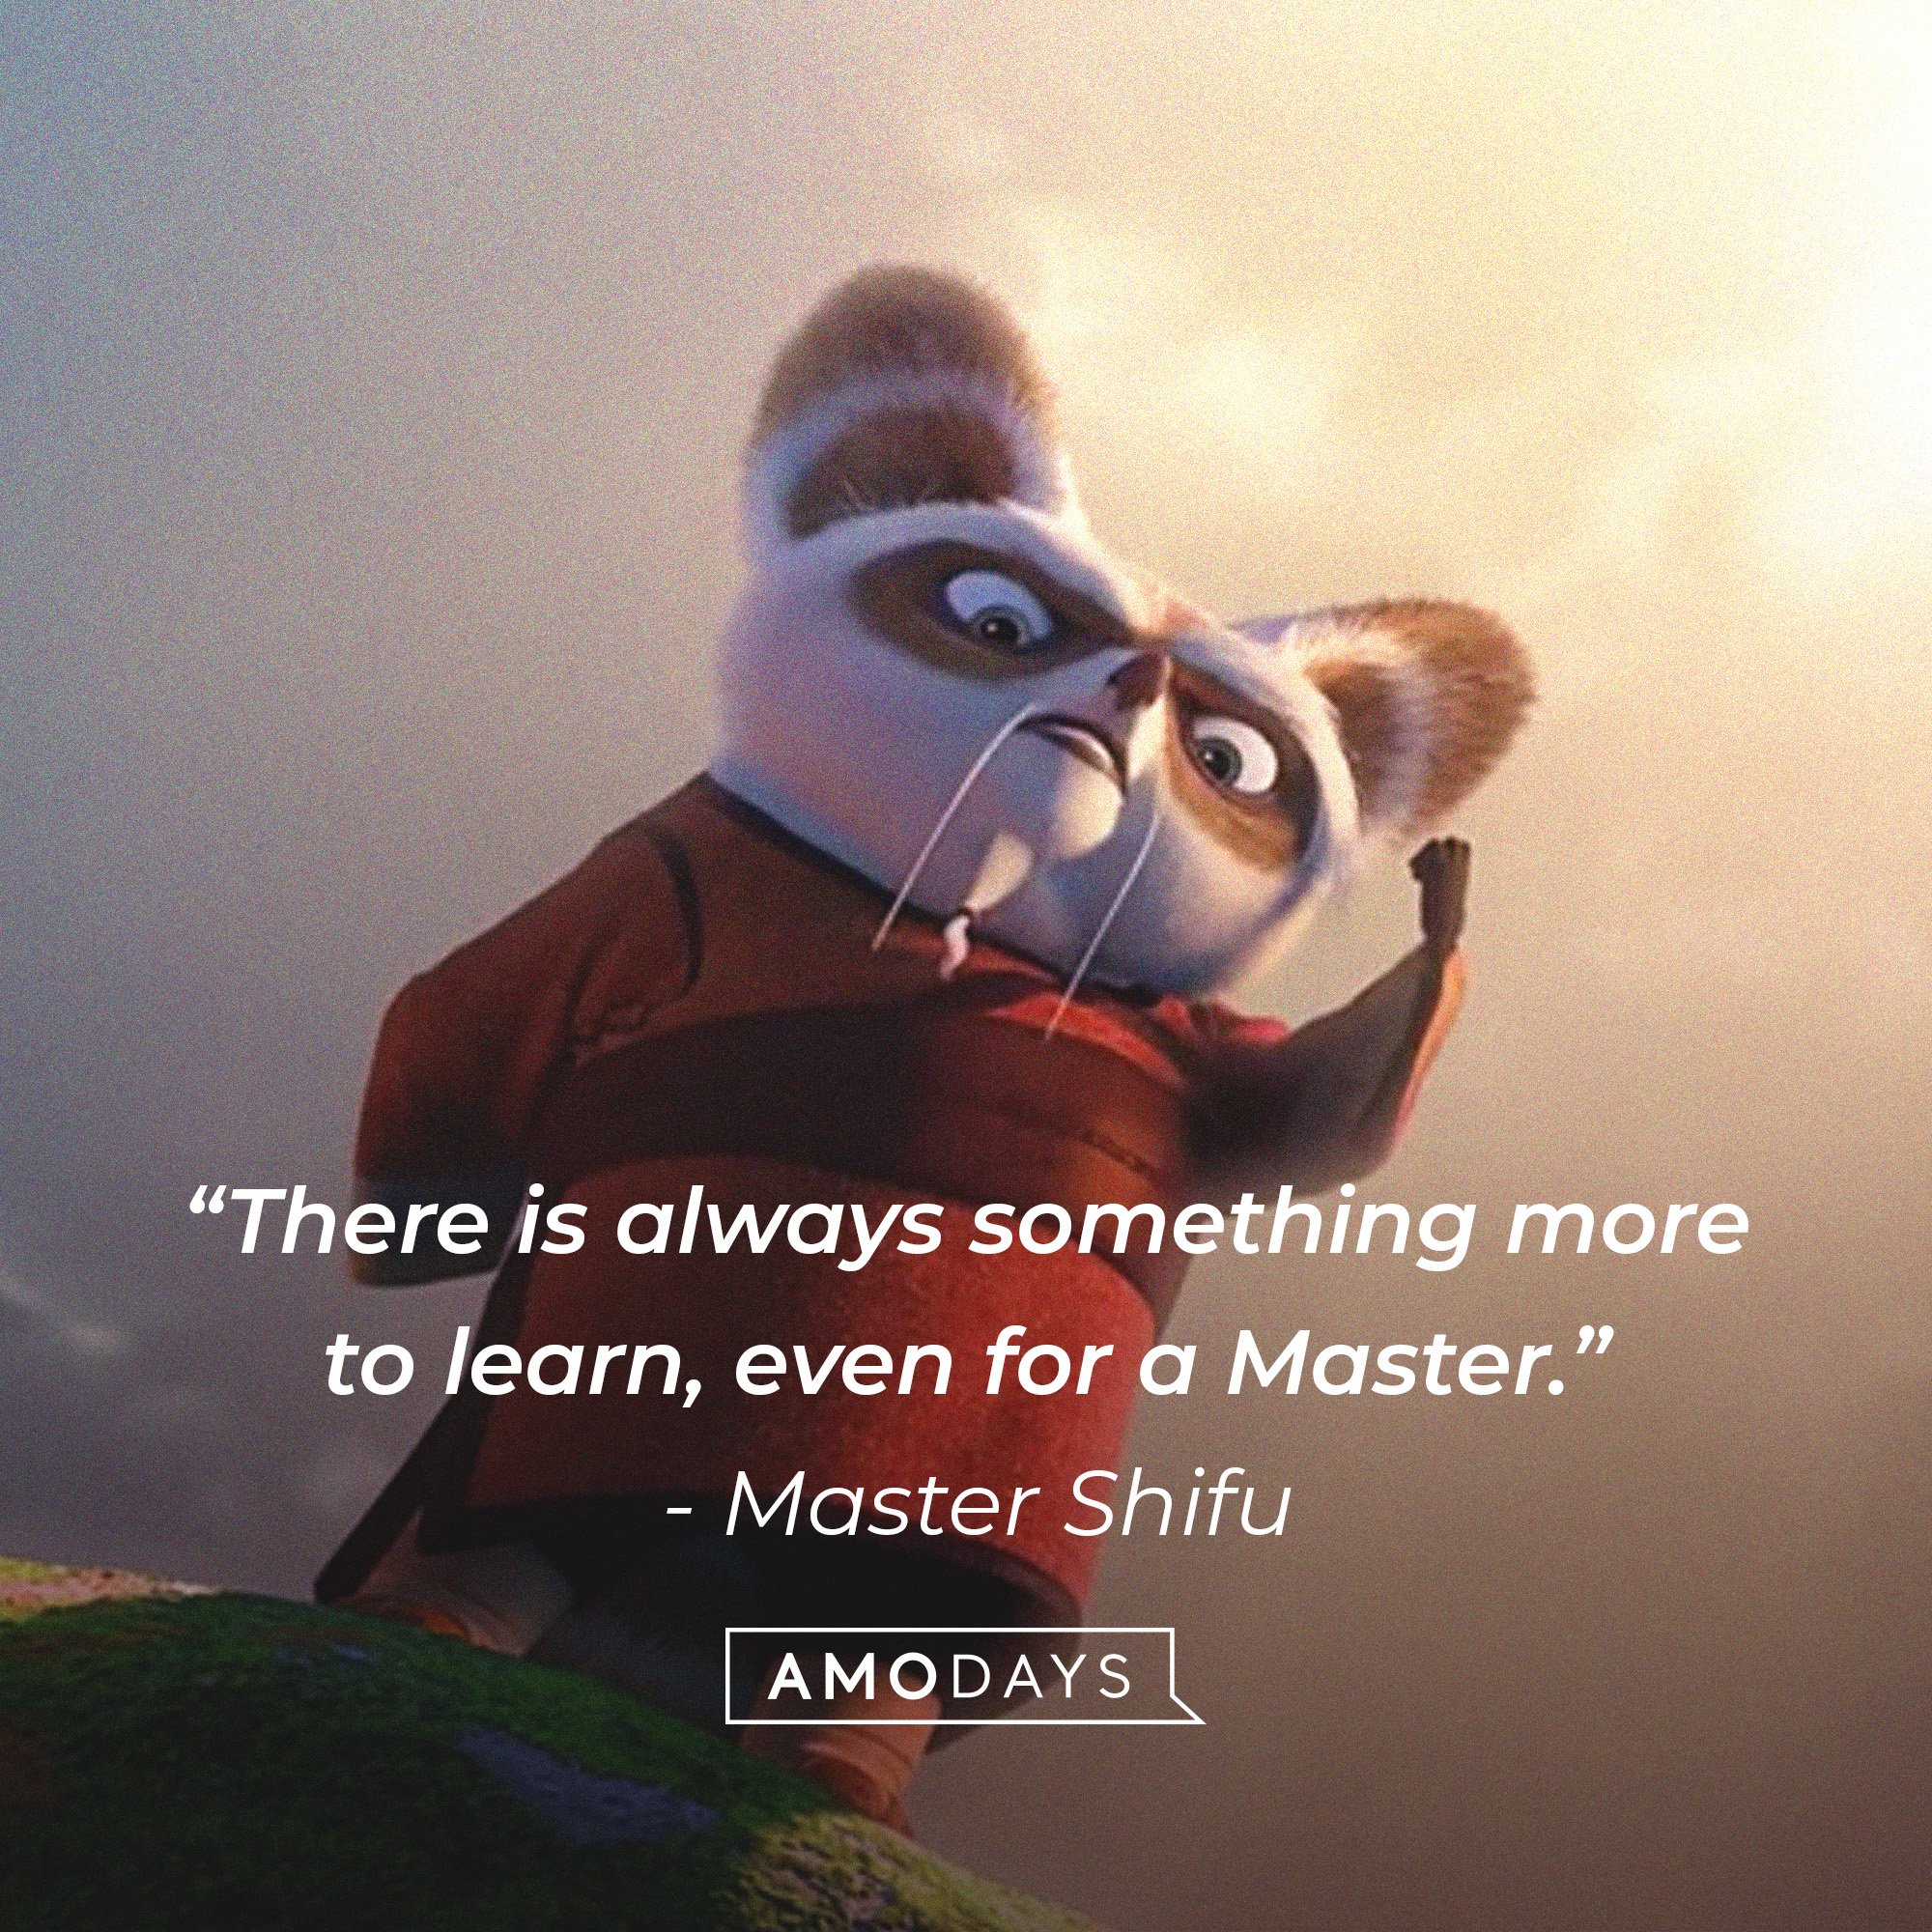  Master Shifu’s quote:“There is always something more to learn, even for a Master.”  | Image: AmoDays